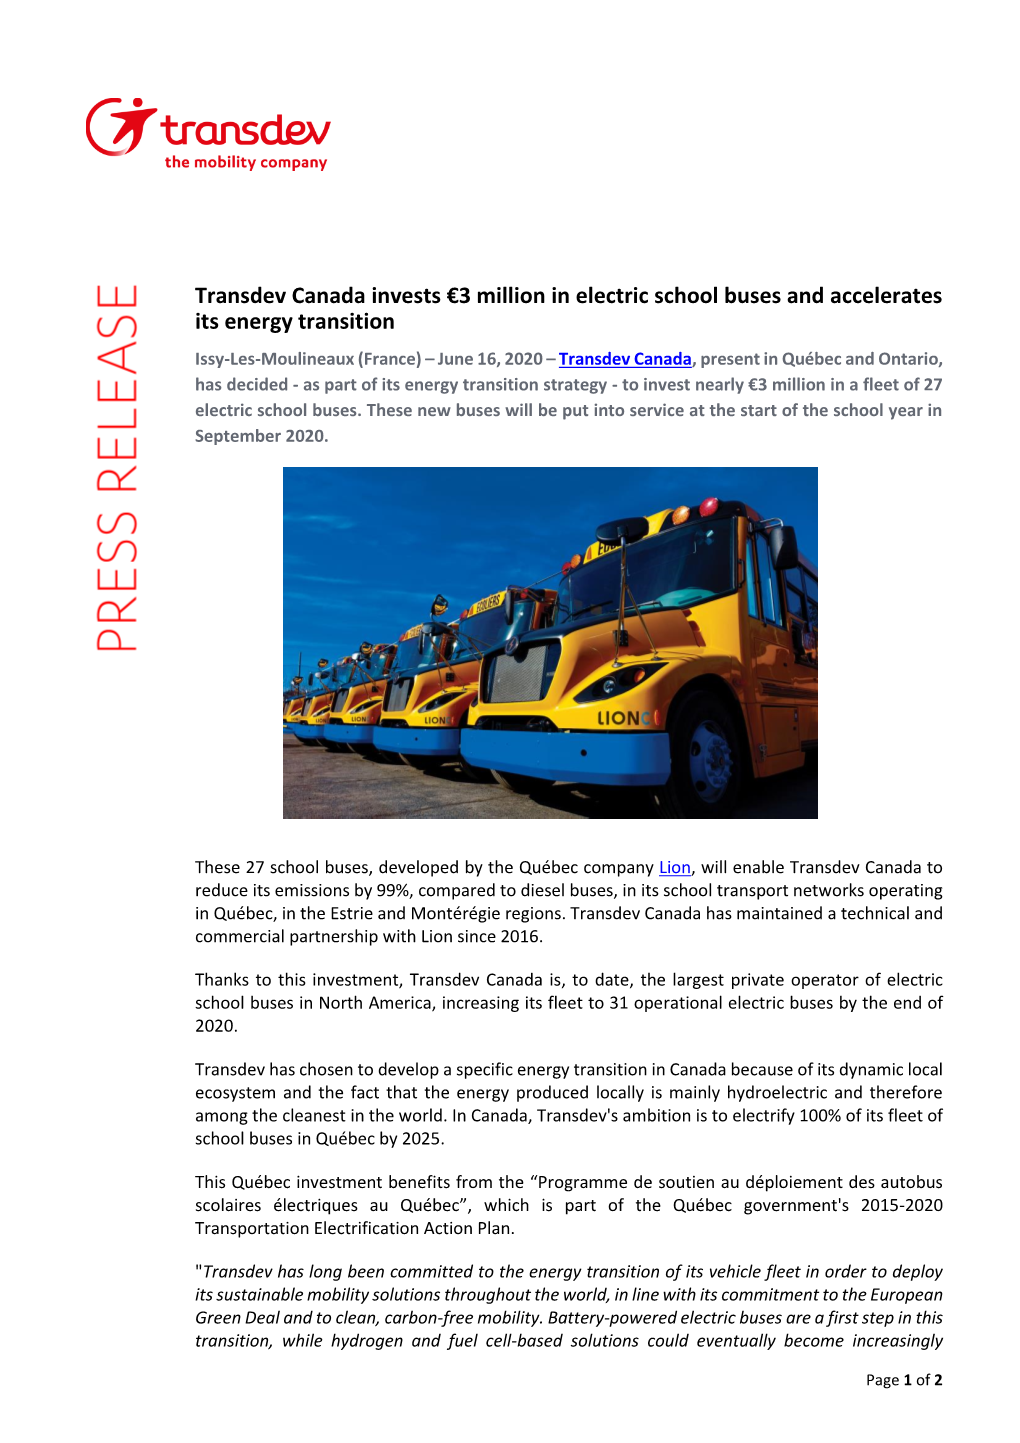 Transdev Canada Invests €3 Million in Electric School Buses And